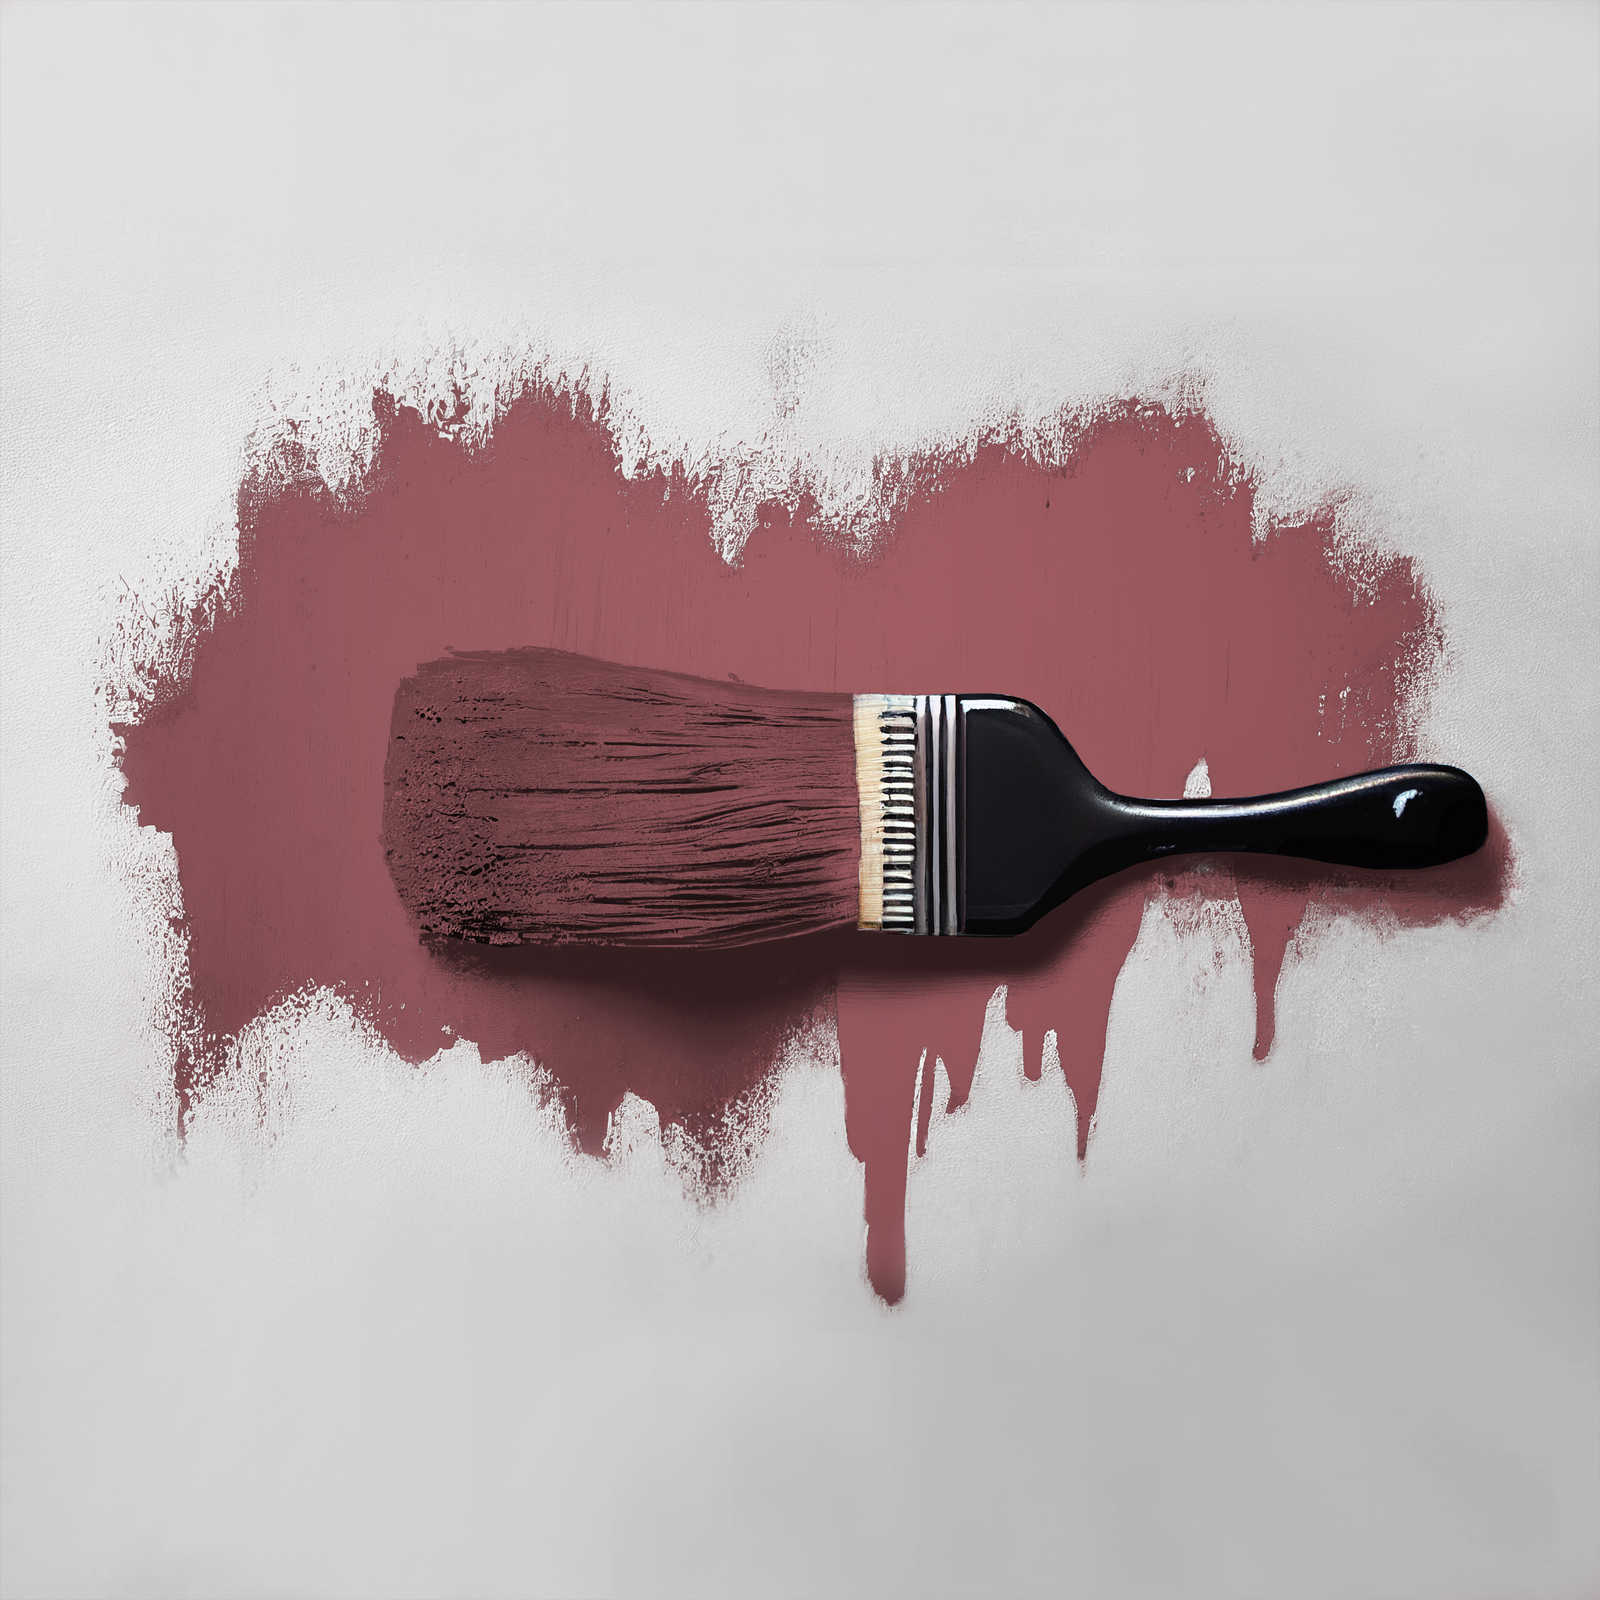             Wall Paint TCK7012 »Sweet Marmelade« in authentic berry shade – 2.5 litre
        